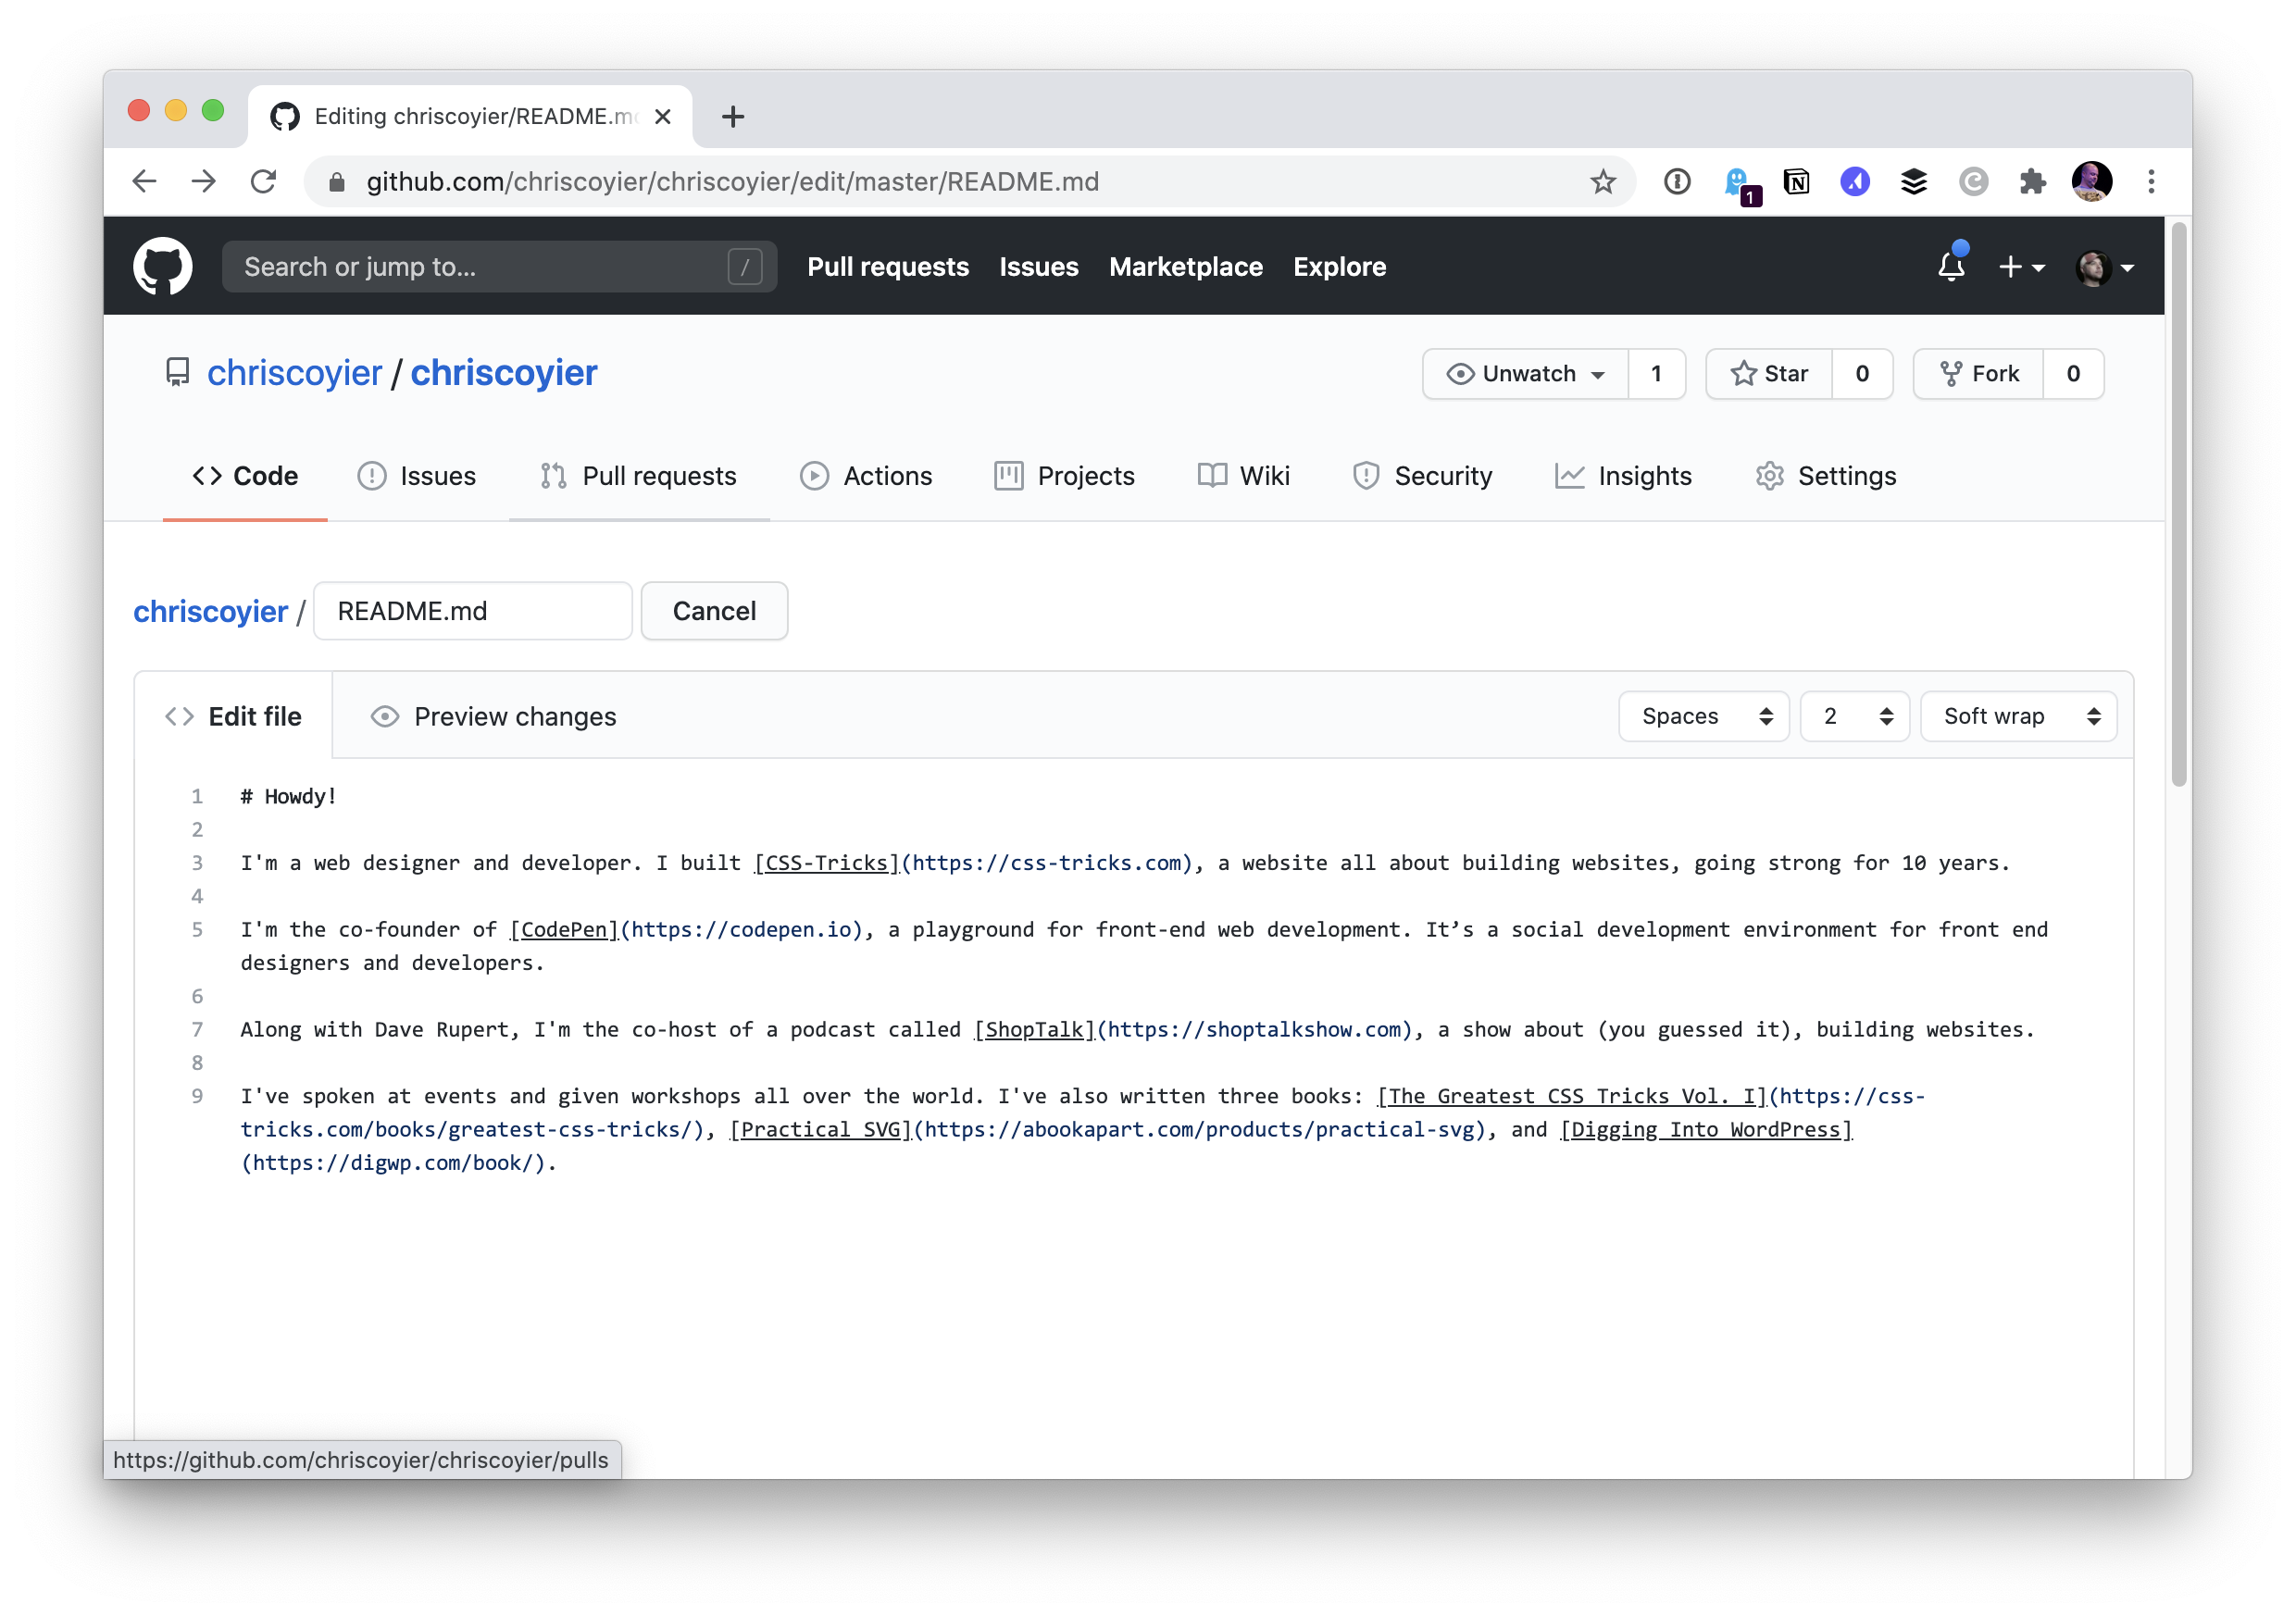 Screenshot showing the Markdown code from the personal website in the GitHub editor.